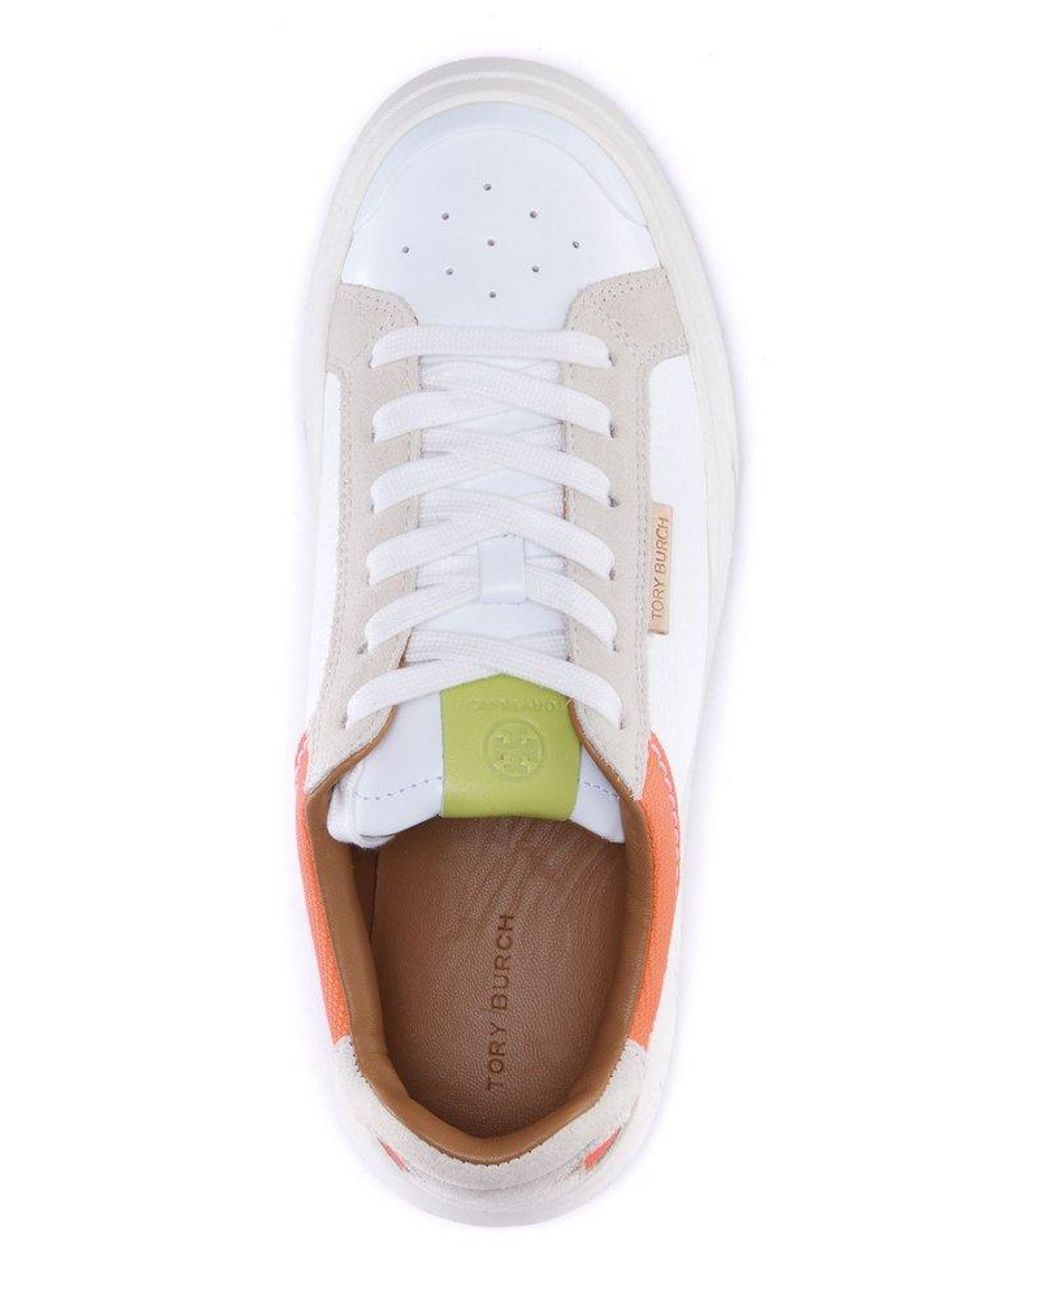 Tory Burch Ladybug Lace-up Sneakers in White | Lyst